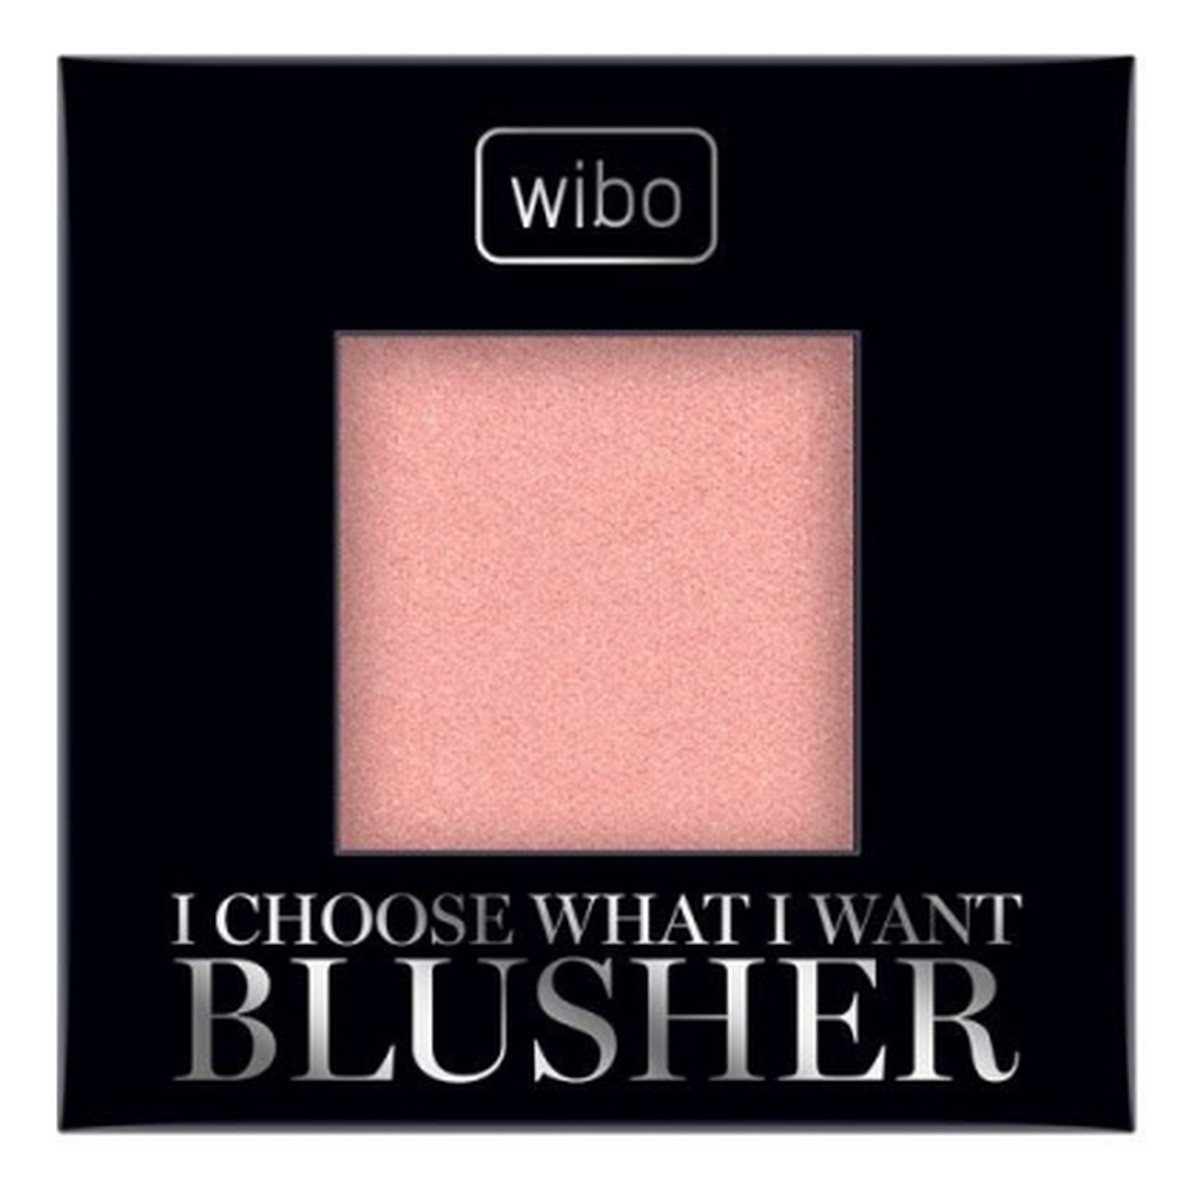 Wibo I choose what i want blusher hd rouge pudrowy róż do policzków 4 coral dust